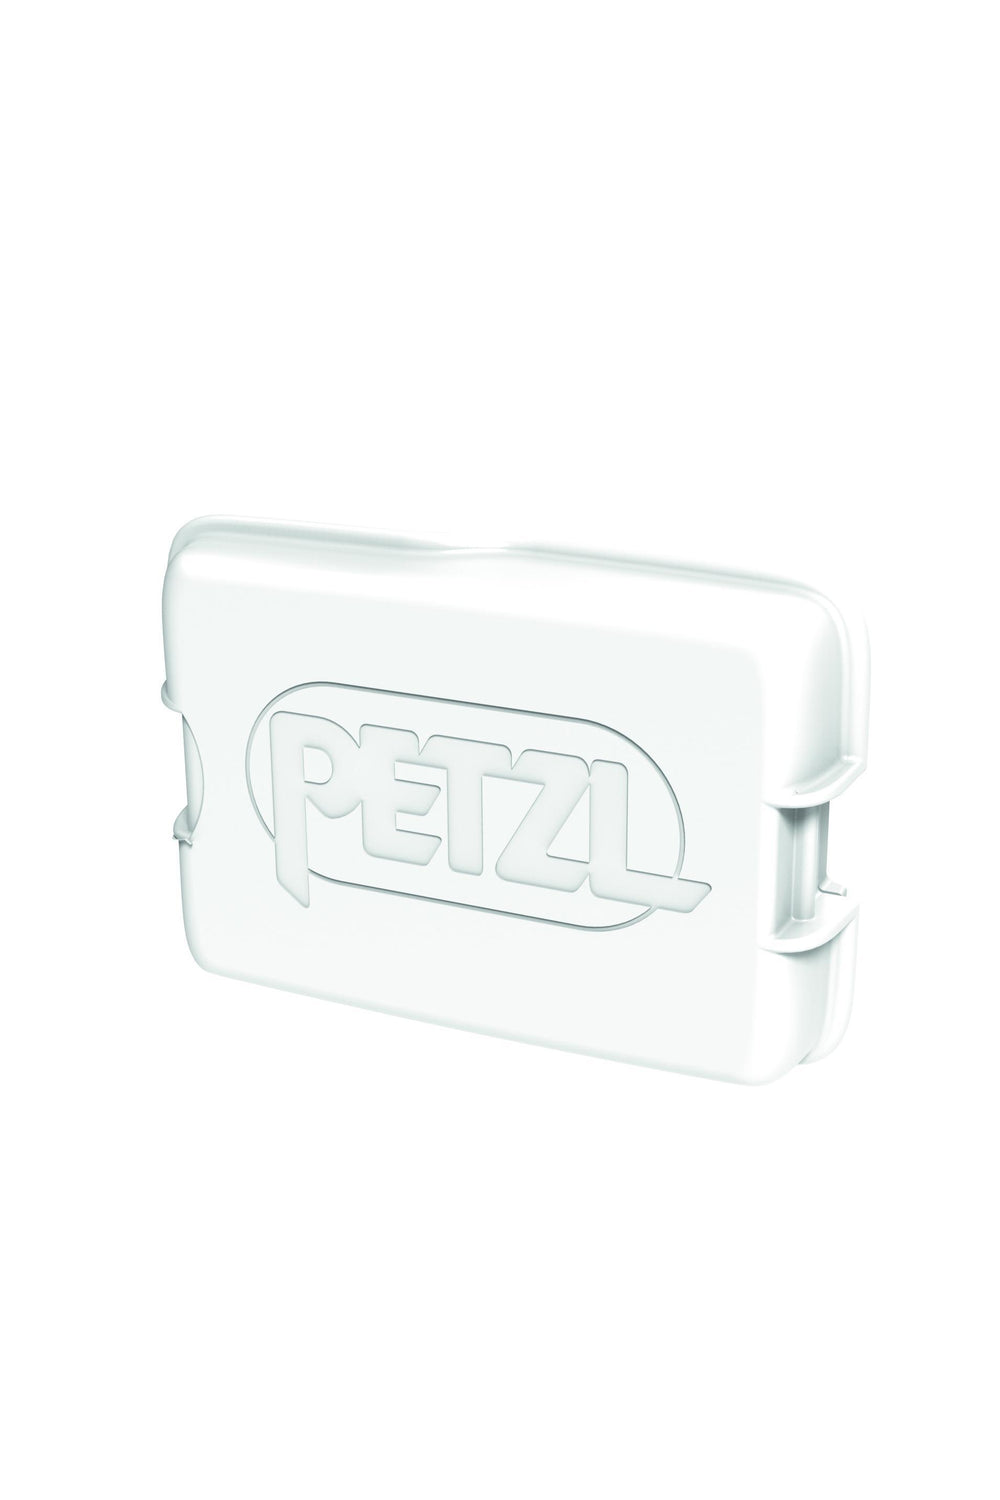 Petzl - ACCU Swift RL (Spare Rechargeable Headtorch Battery)